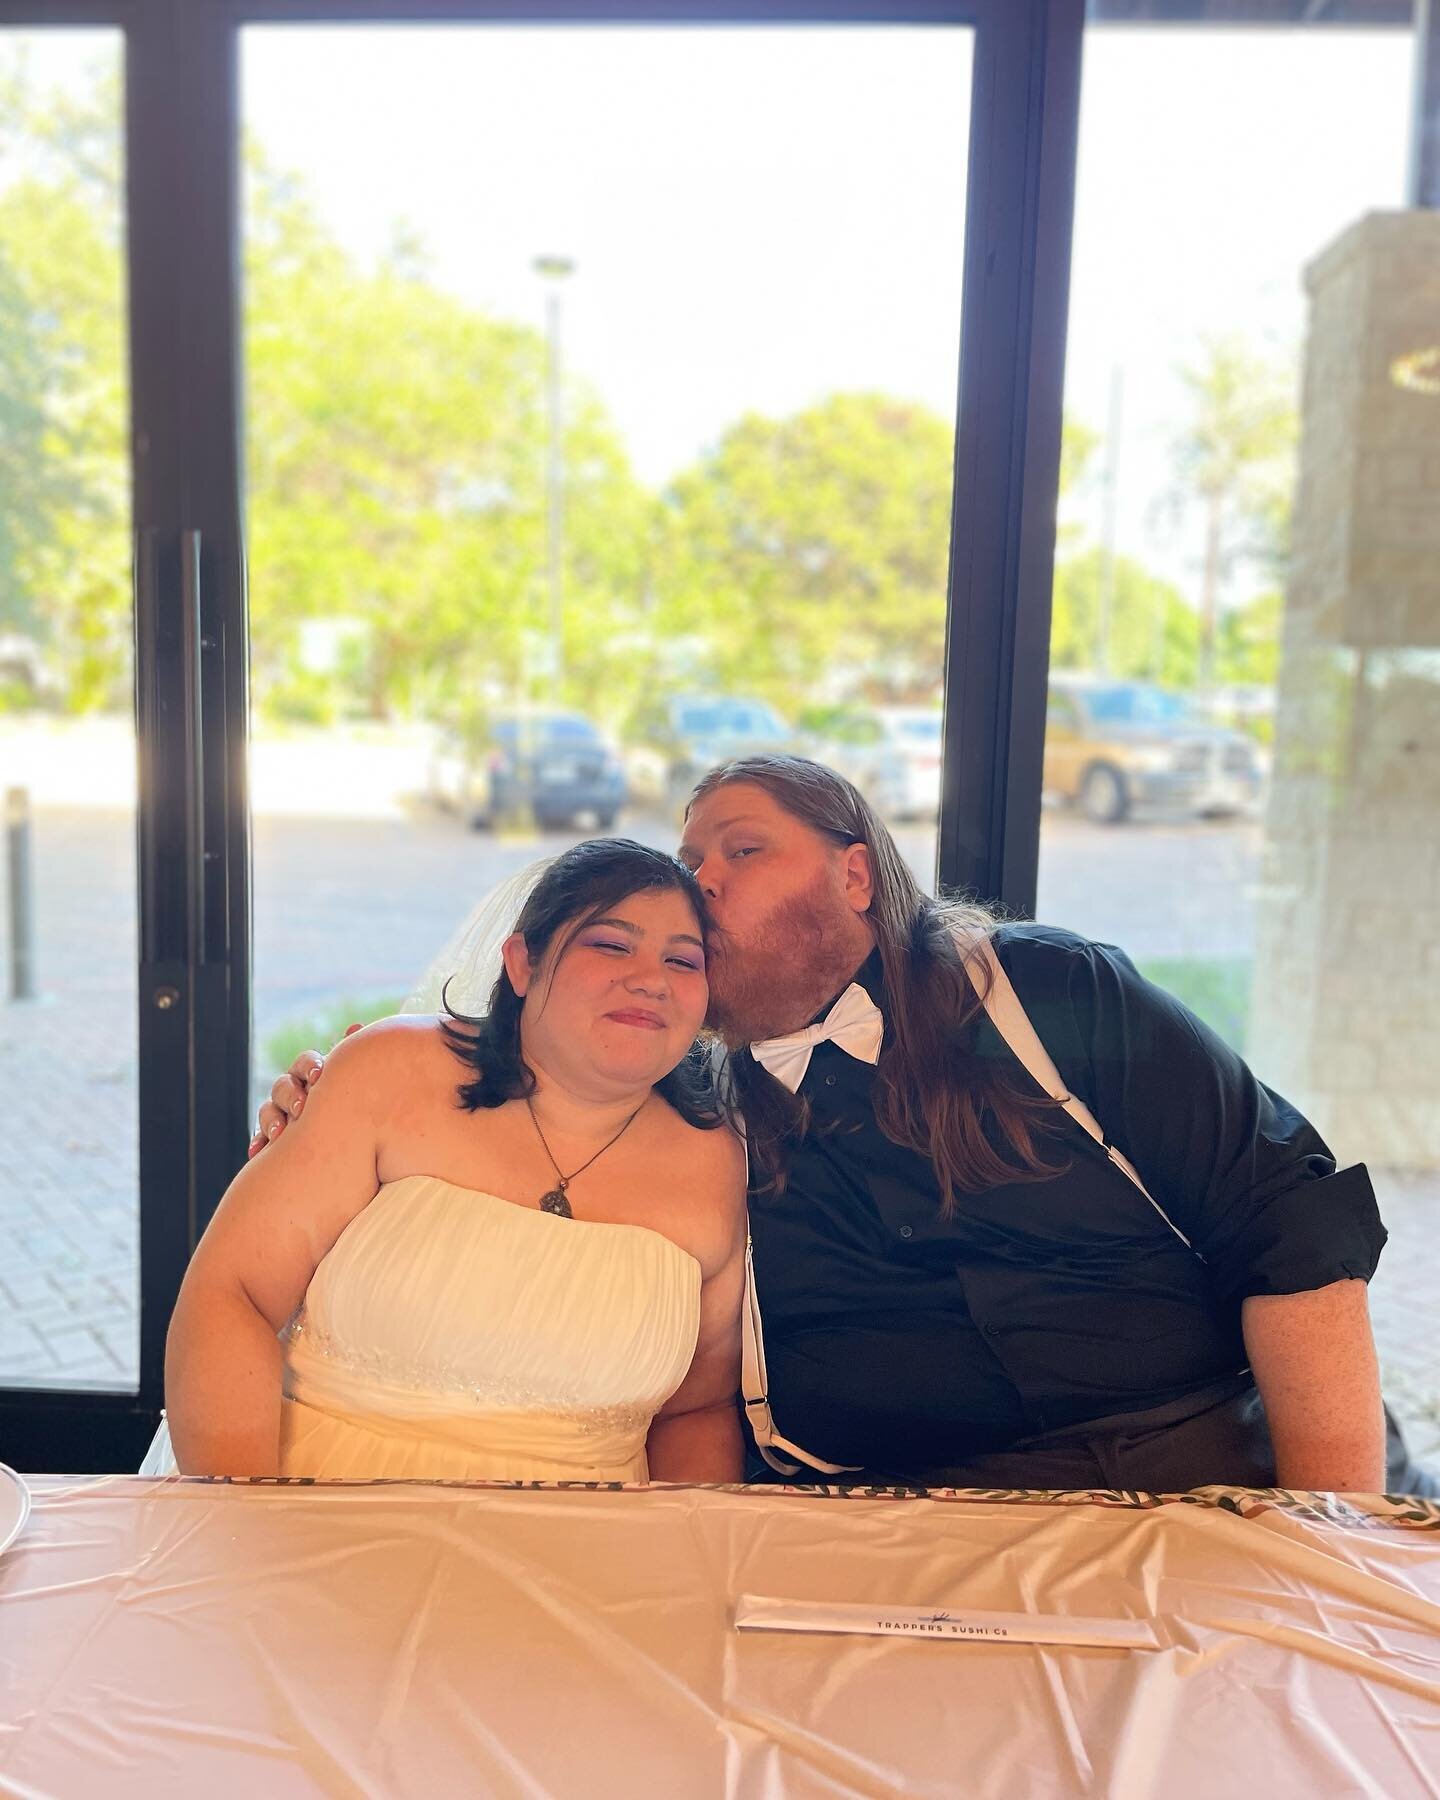 💍 Congratulations to Bryan and Bella on their big day!! 🍱

@trapperssushi can cater your event too, just reach out to your local Trapper&rsquo;s or DM us to learn more.
.
.
.
.
.
#sushilovers #trapperssushi #wedding #catering #sushitime